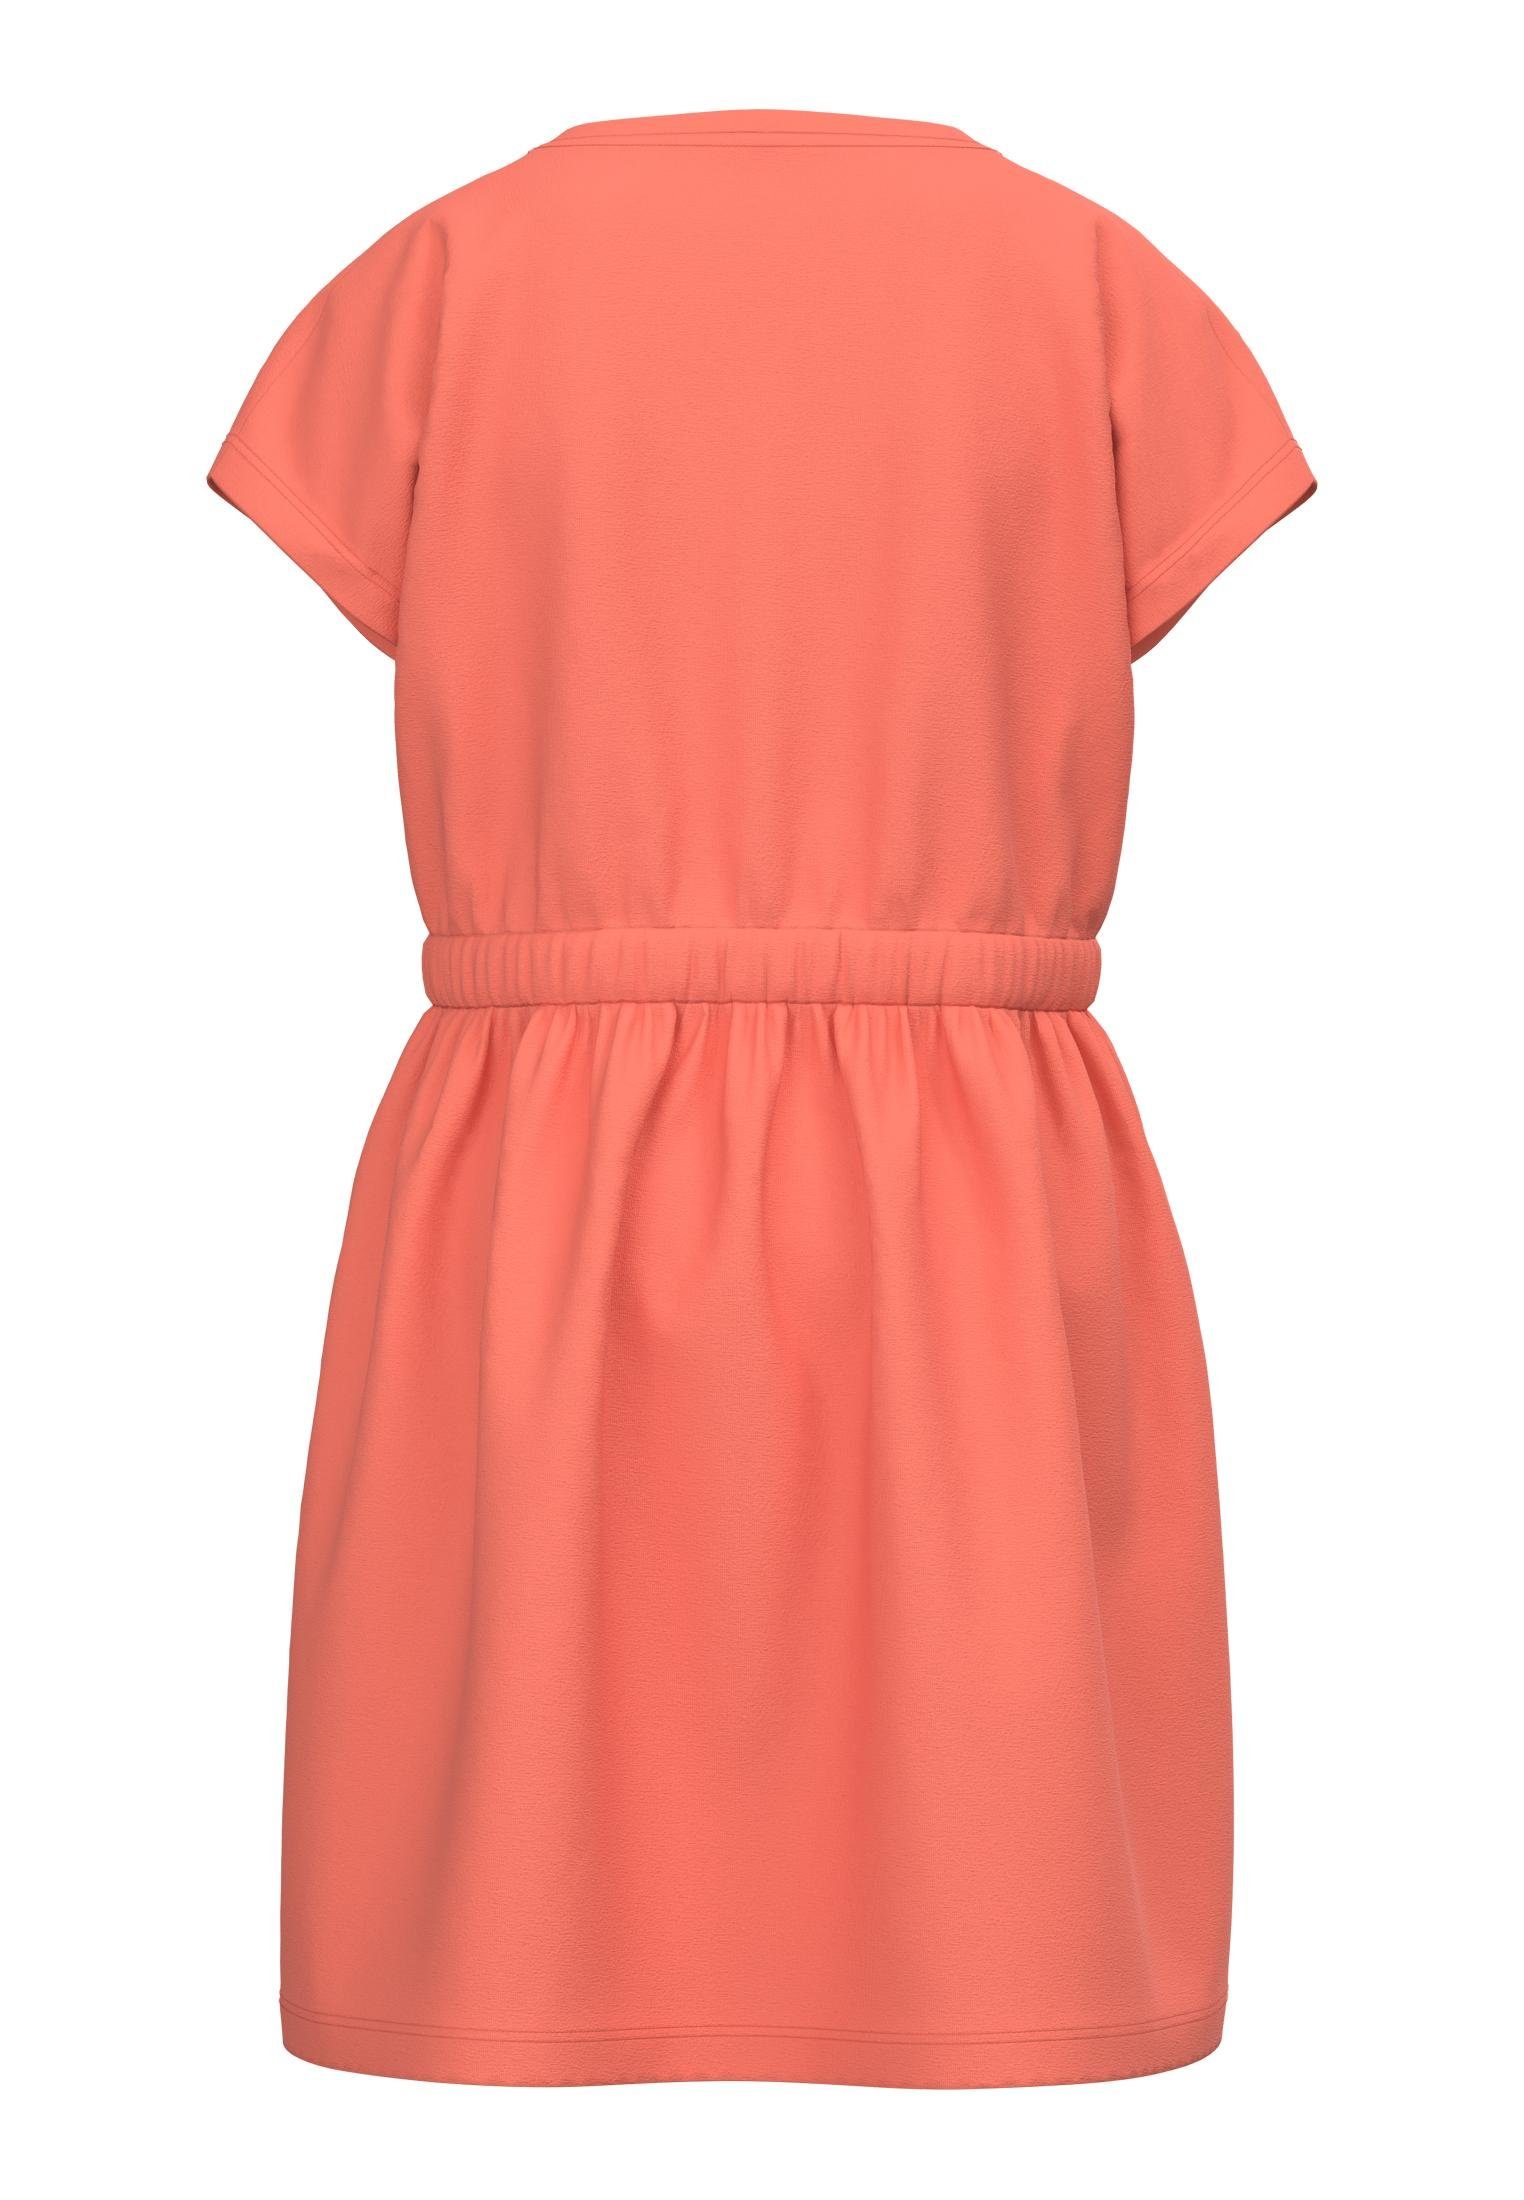 Jerseykleid Name It coral NKFMIEDRESS